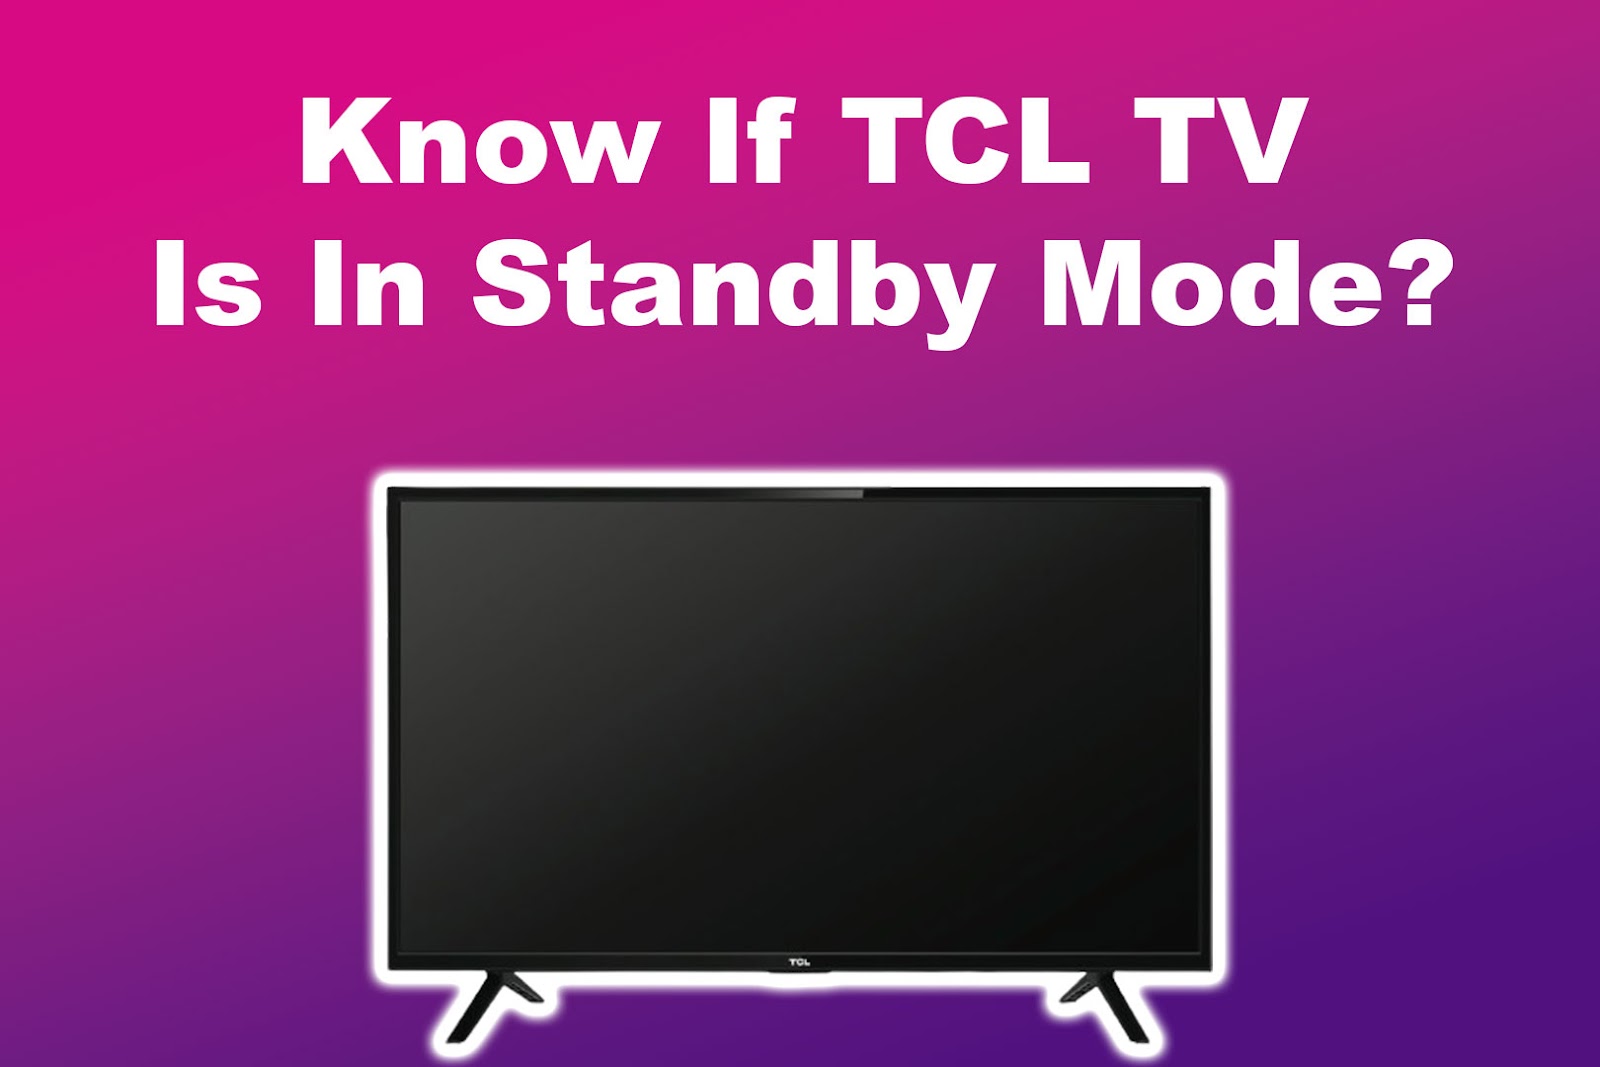 Know If TCL TV Is In Standby Mode